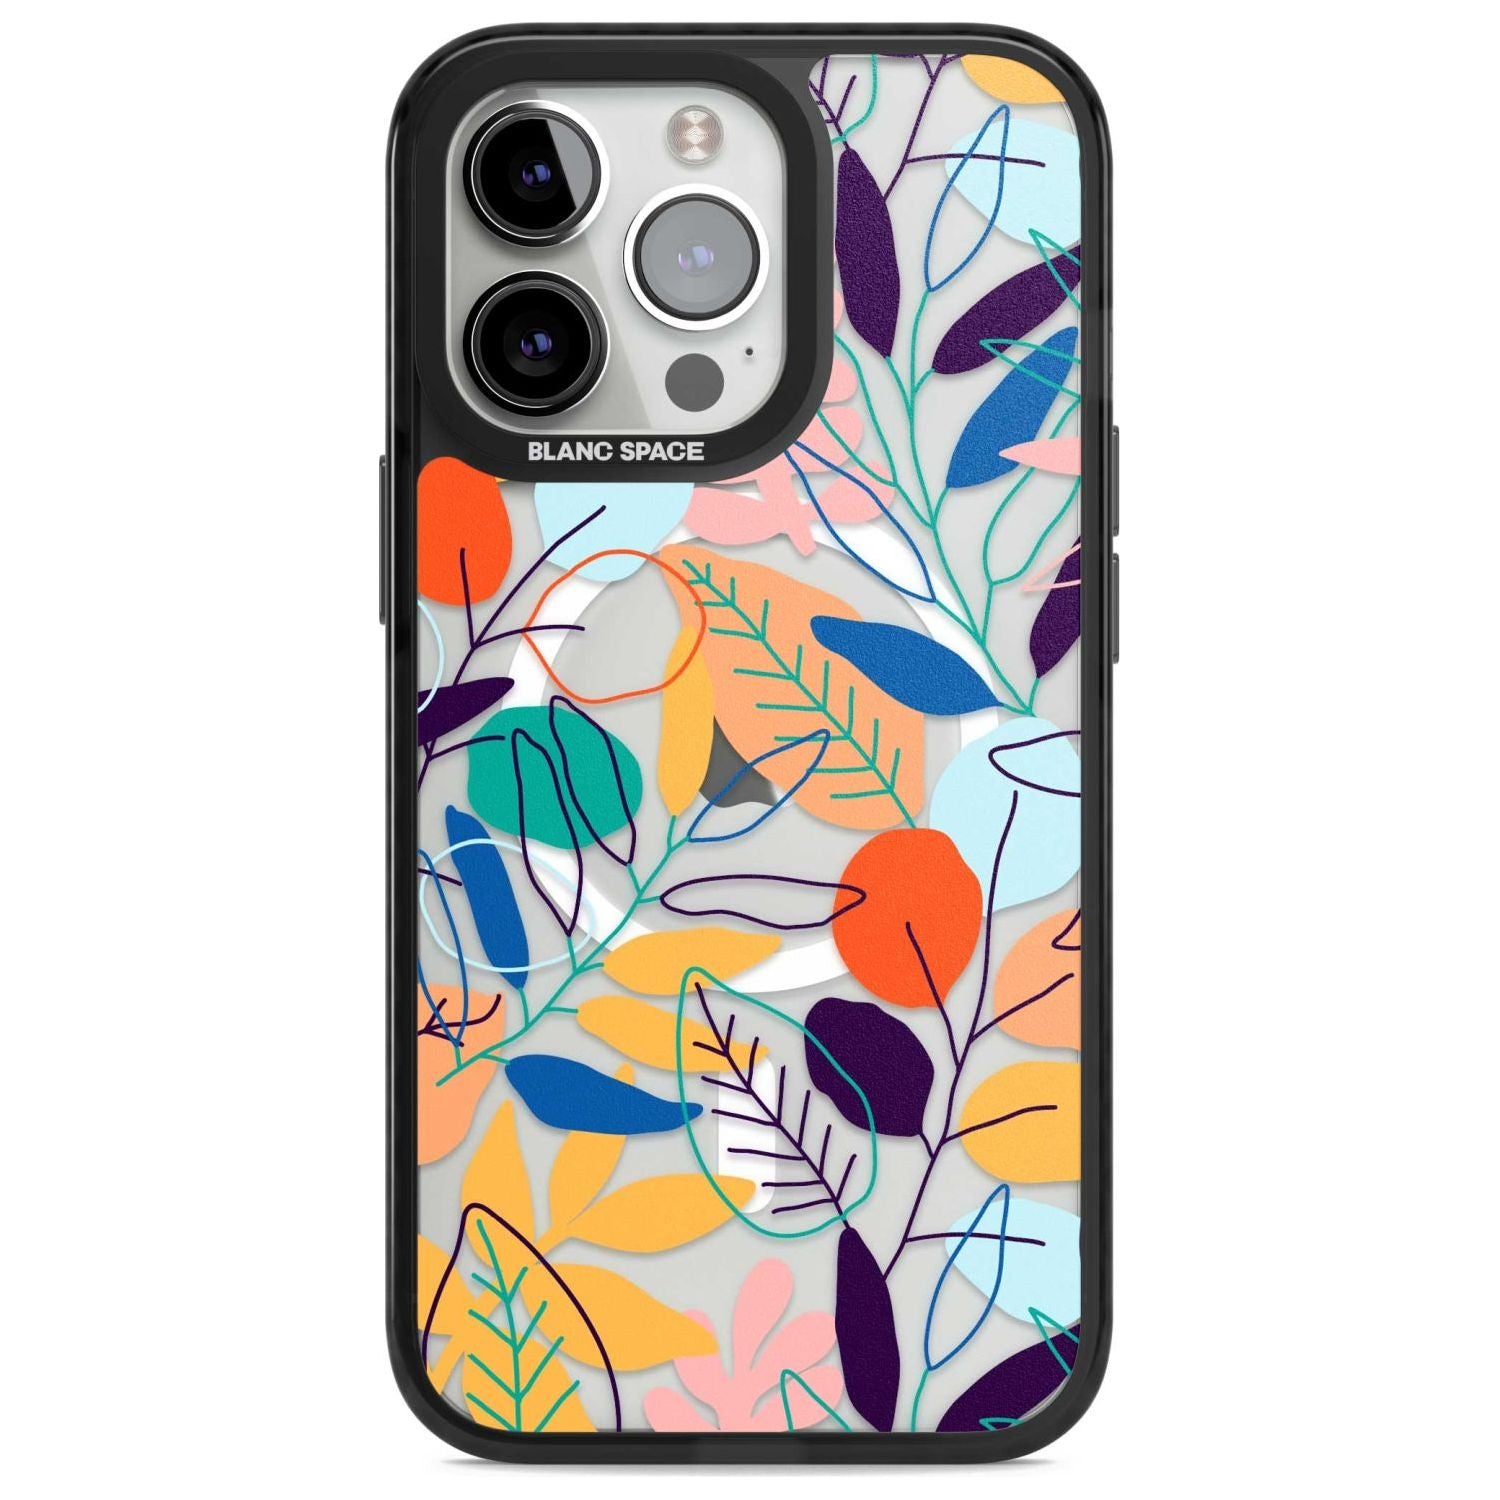 Abstract Line Drawn Leaves Phone Case iPhone 15 Pro Max / Magsafe Black Impact Case,iPhone 15 Pro / Magsafe Black Impact Case,iPhone 14 Pro Max / Magsafe Black Impact Case,iPhone 14 Pro / Magsafe Black Impact Case,iPhone 13 Pro / Magsafe Black Impact Case Blanc Space